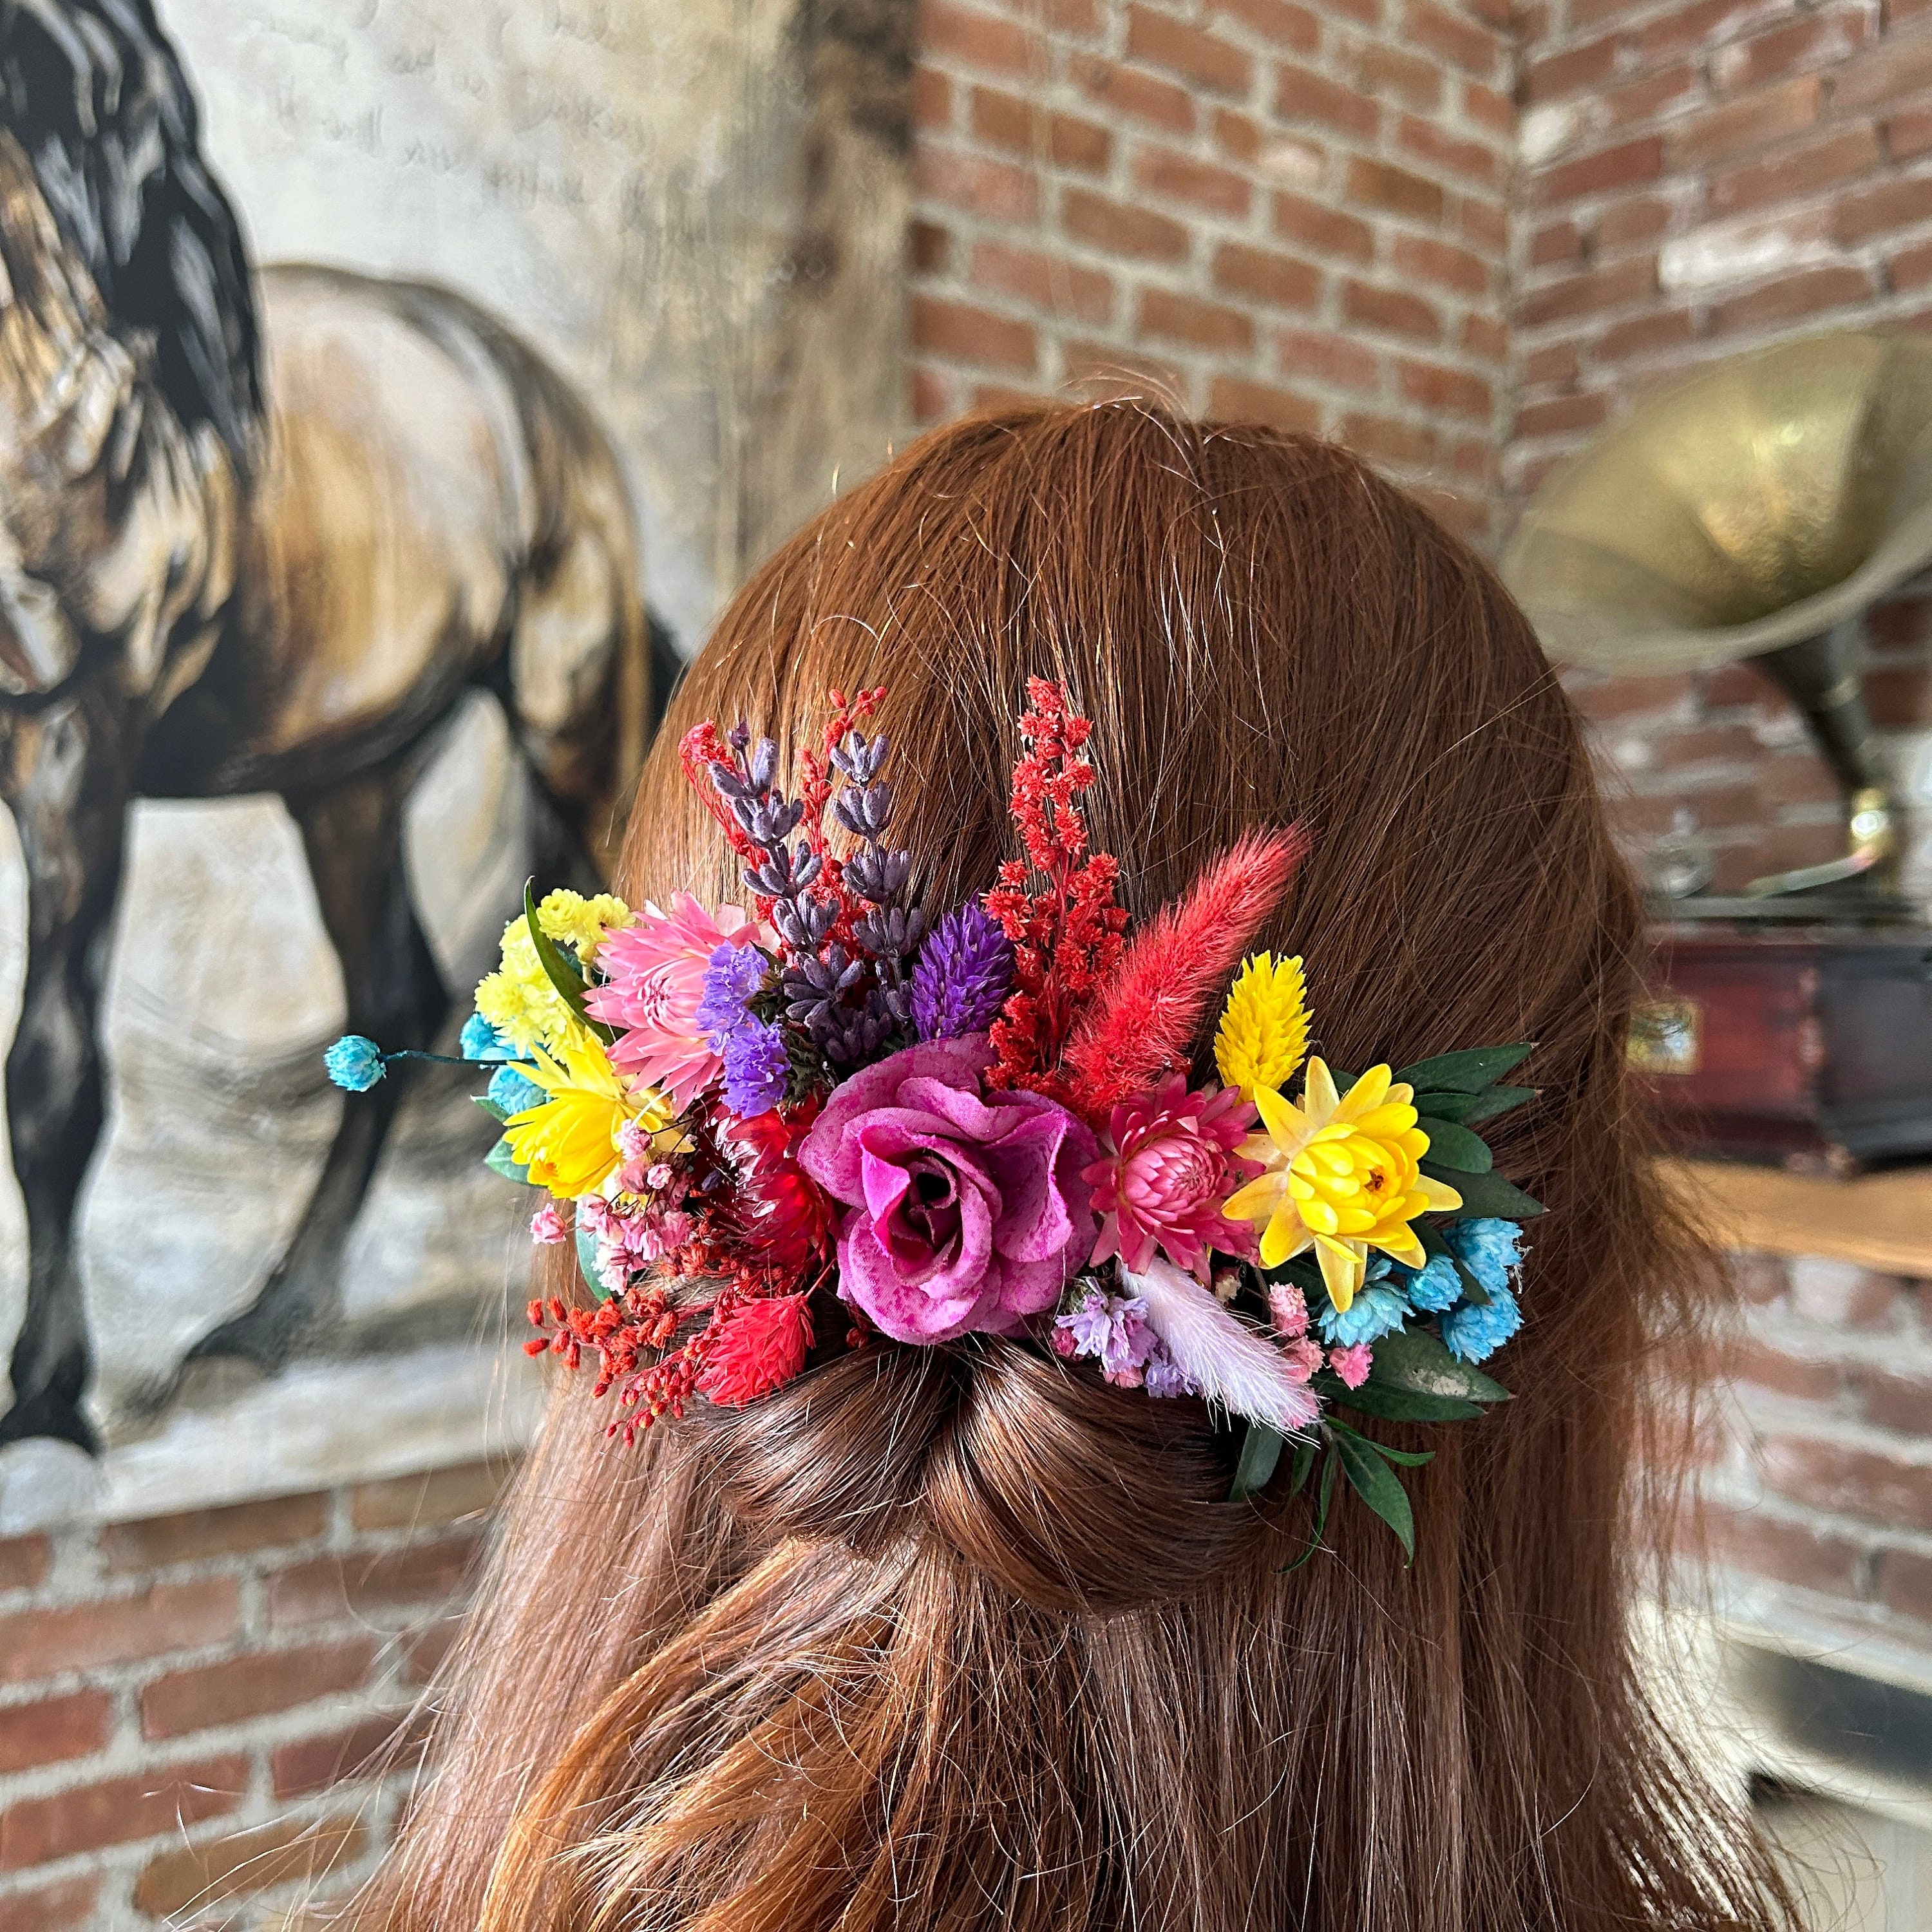 Girl Hair Pin, Handmade Crochet Hair Clip, Toddler Fish Rainbow Lavander  Headband Tie Accessories, Hair Care Style Party Favor Gift for Her 